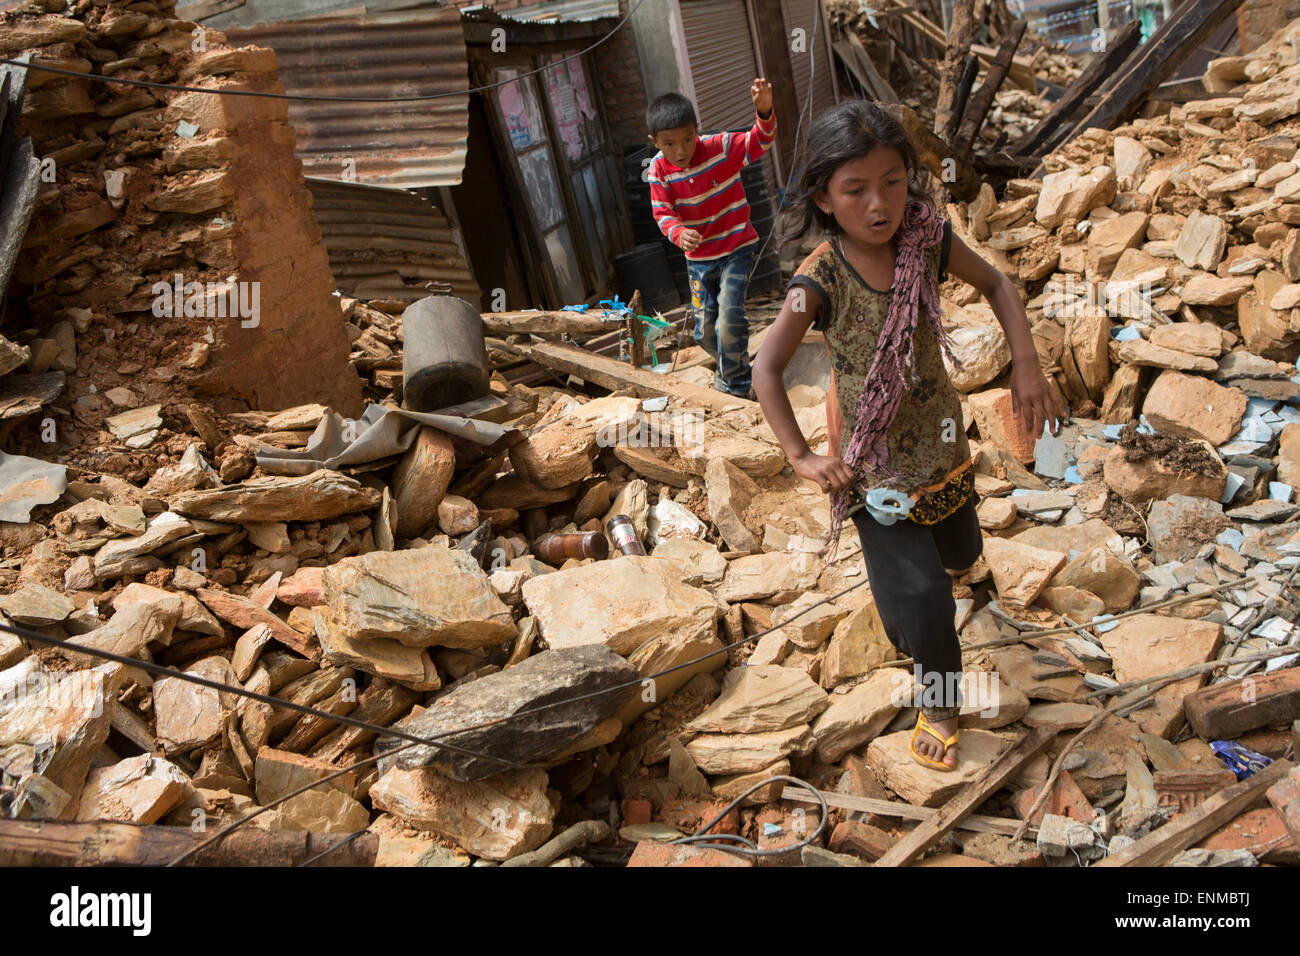 Children run through the streets of Chautara town in Sindhulpalchowk District, Nepal following the 2015 earthquake. Stock Photo